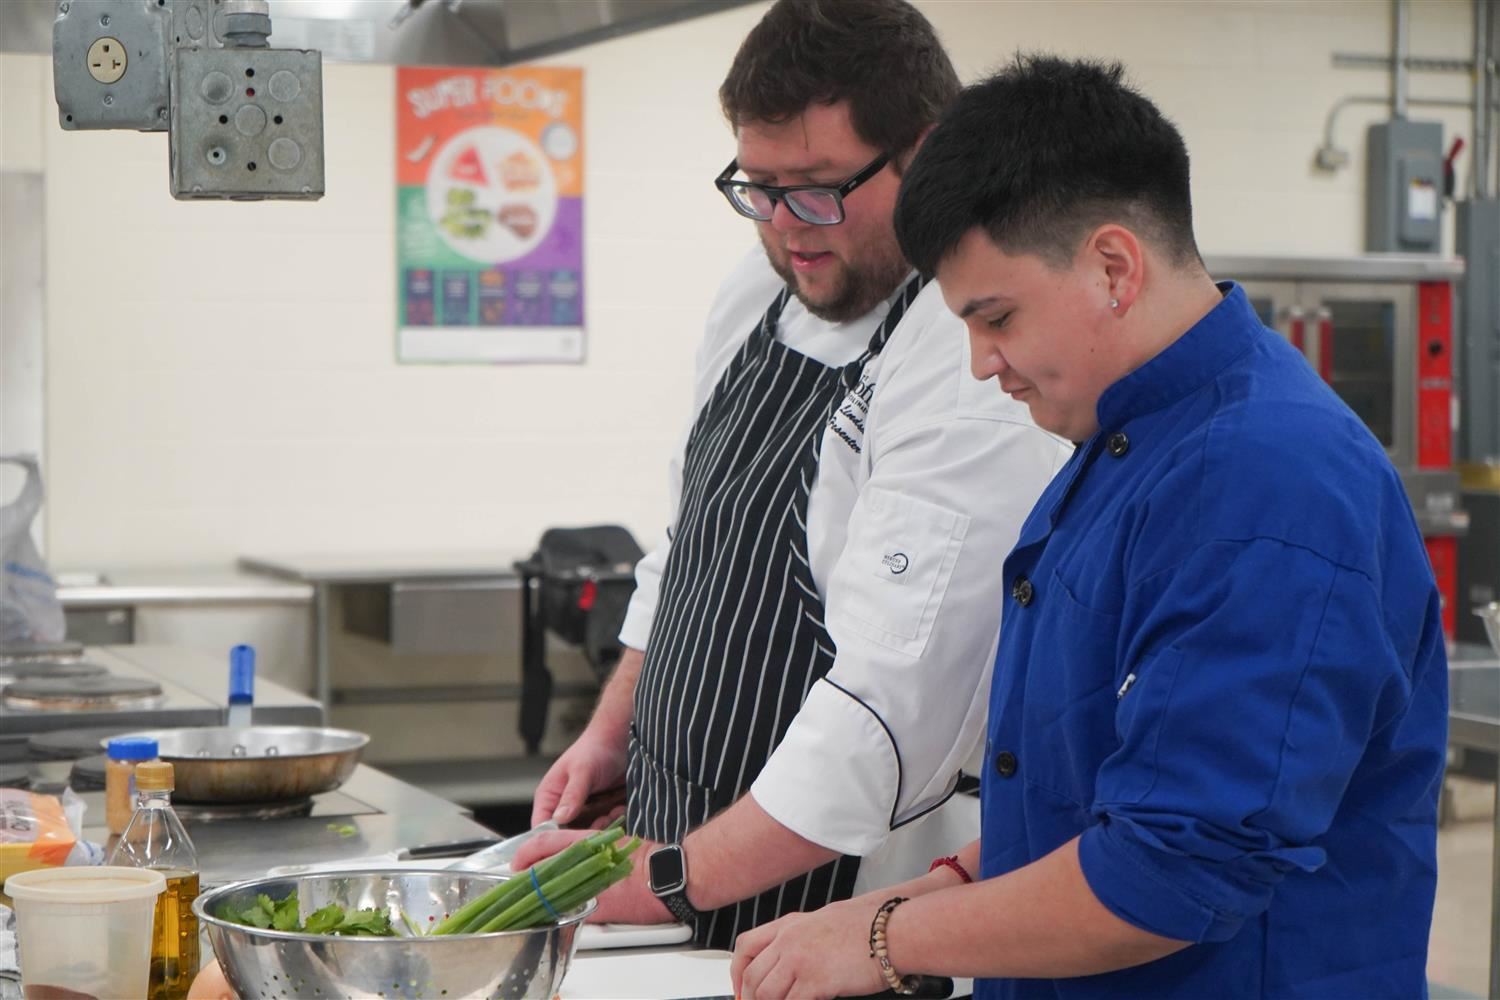  Guest chef brings experience, tacos to high school 